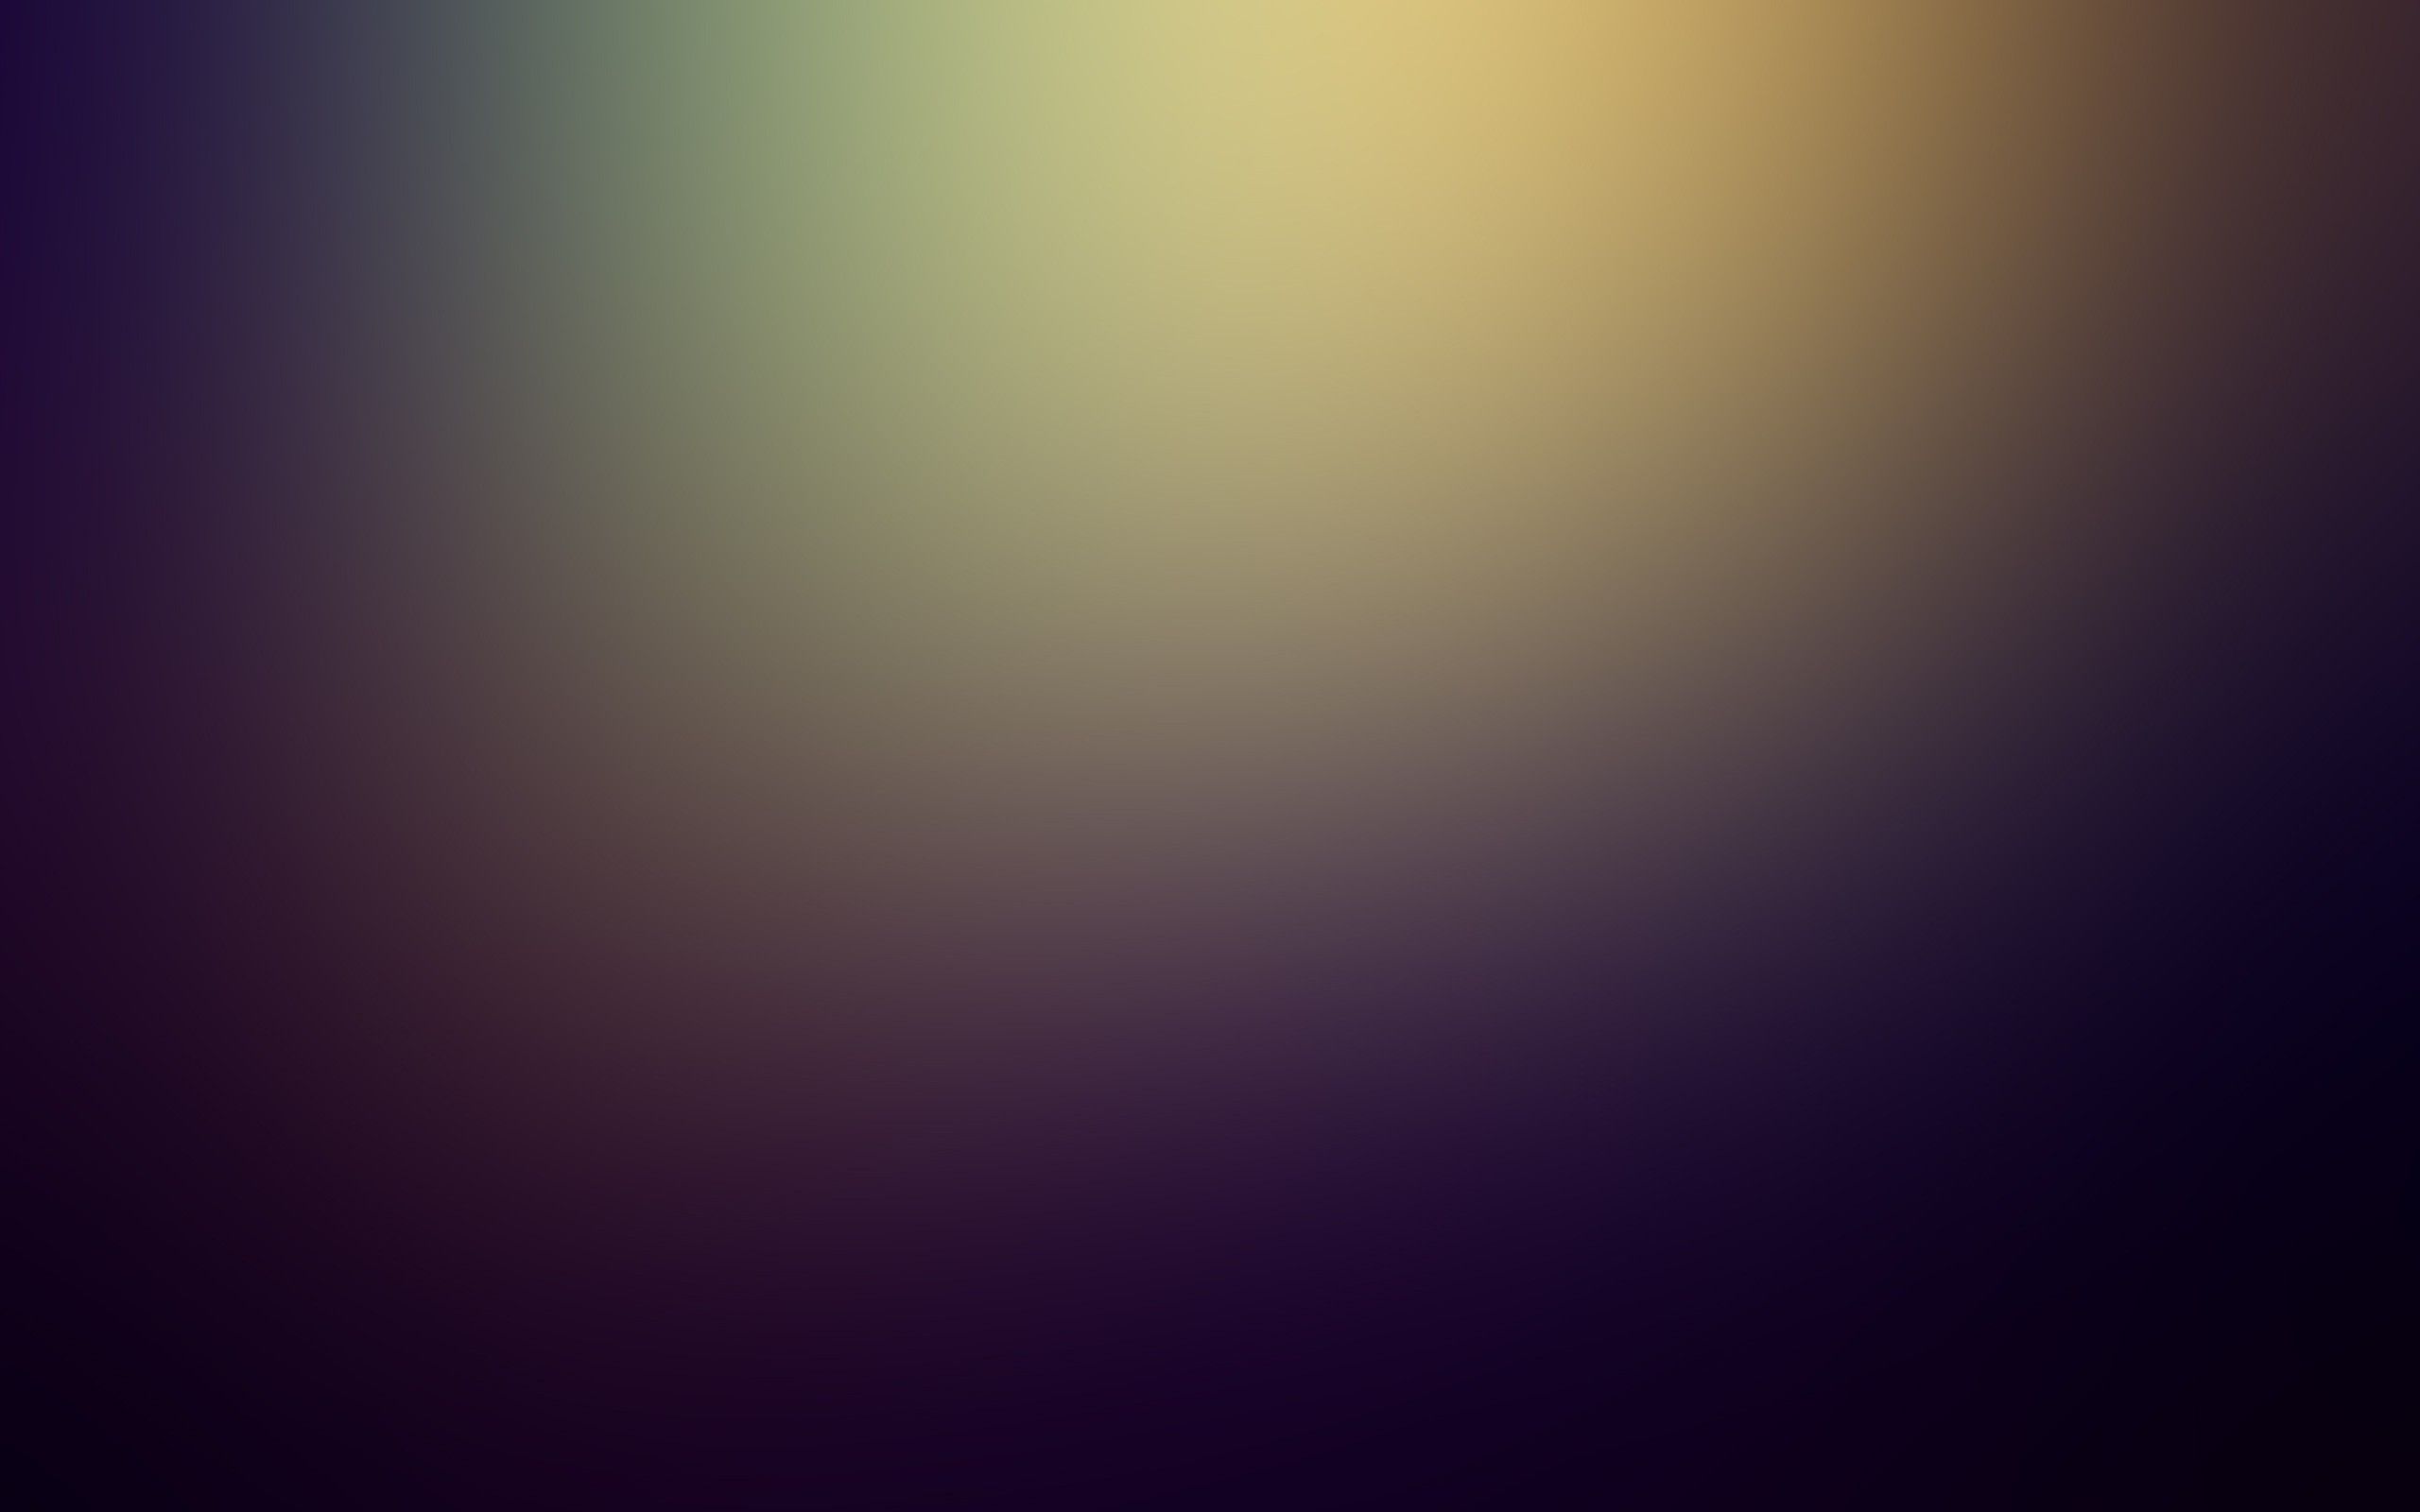 A simple, colorful, and free to use wallpaper for your desktop or phone. - Blurry